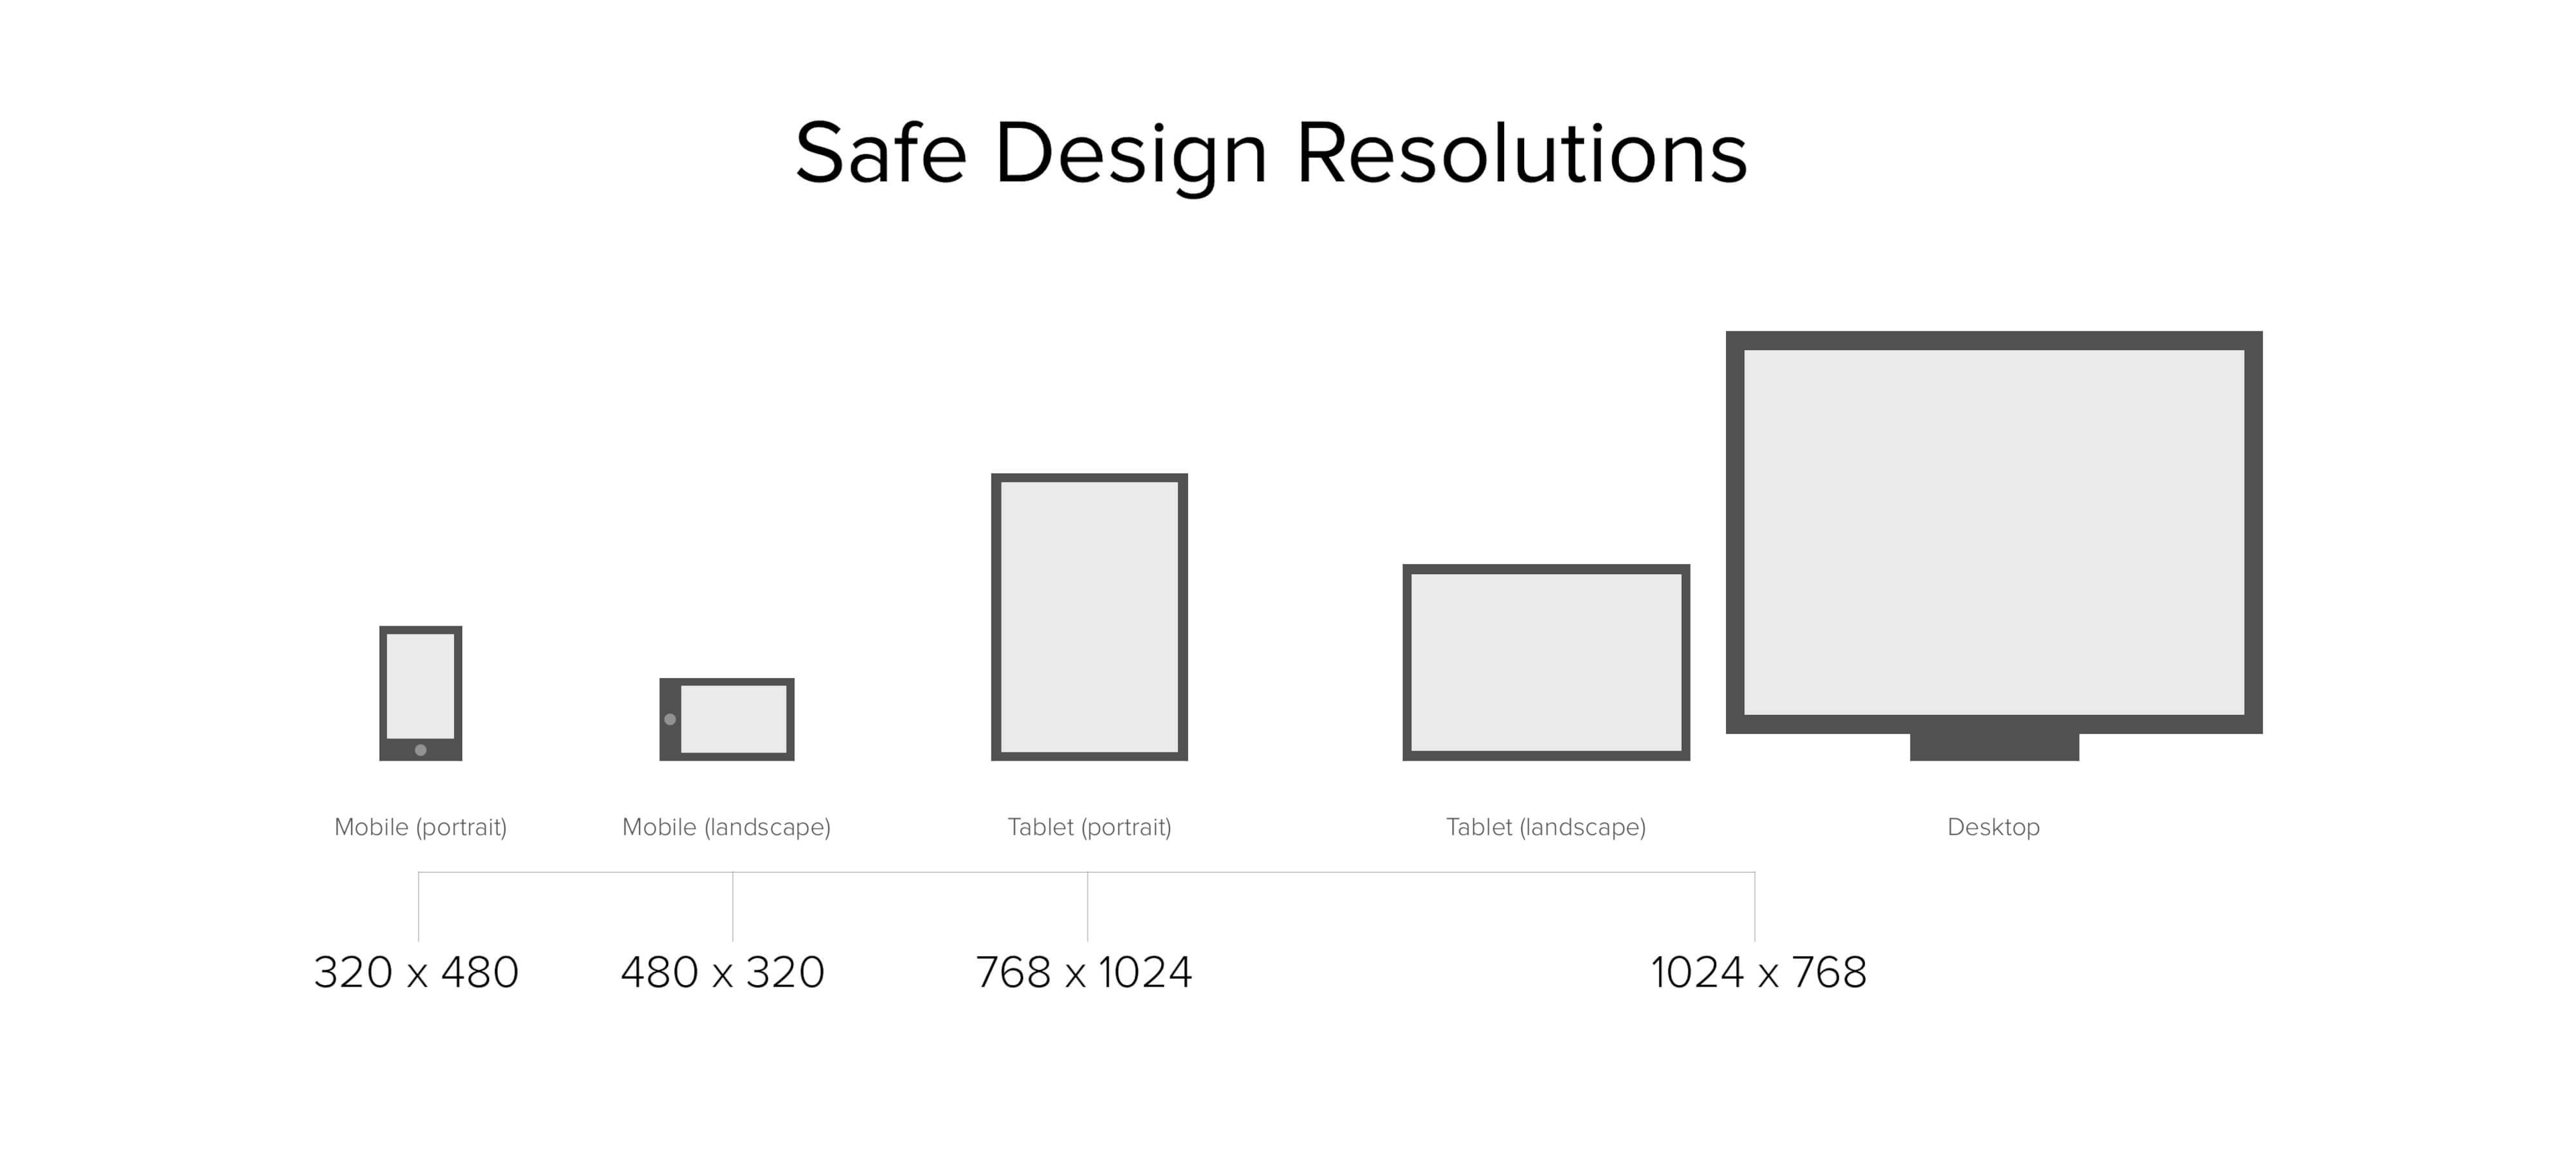 Design resolutions for wireframing